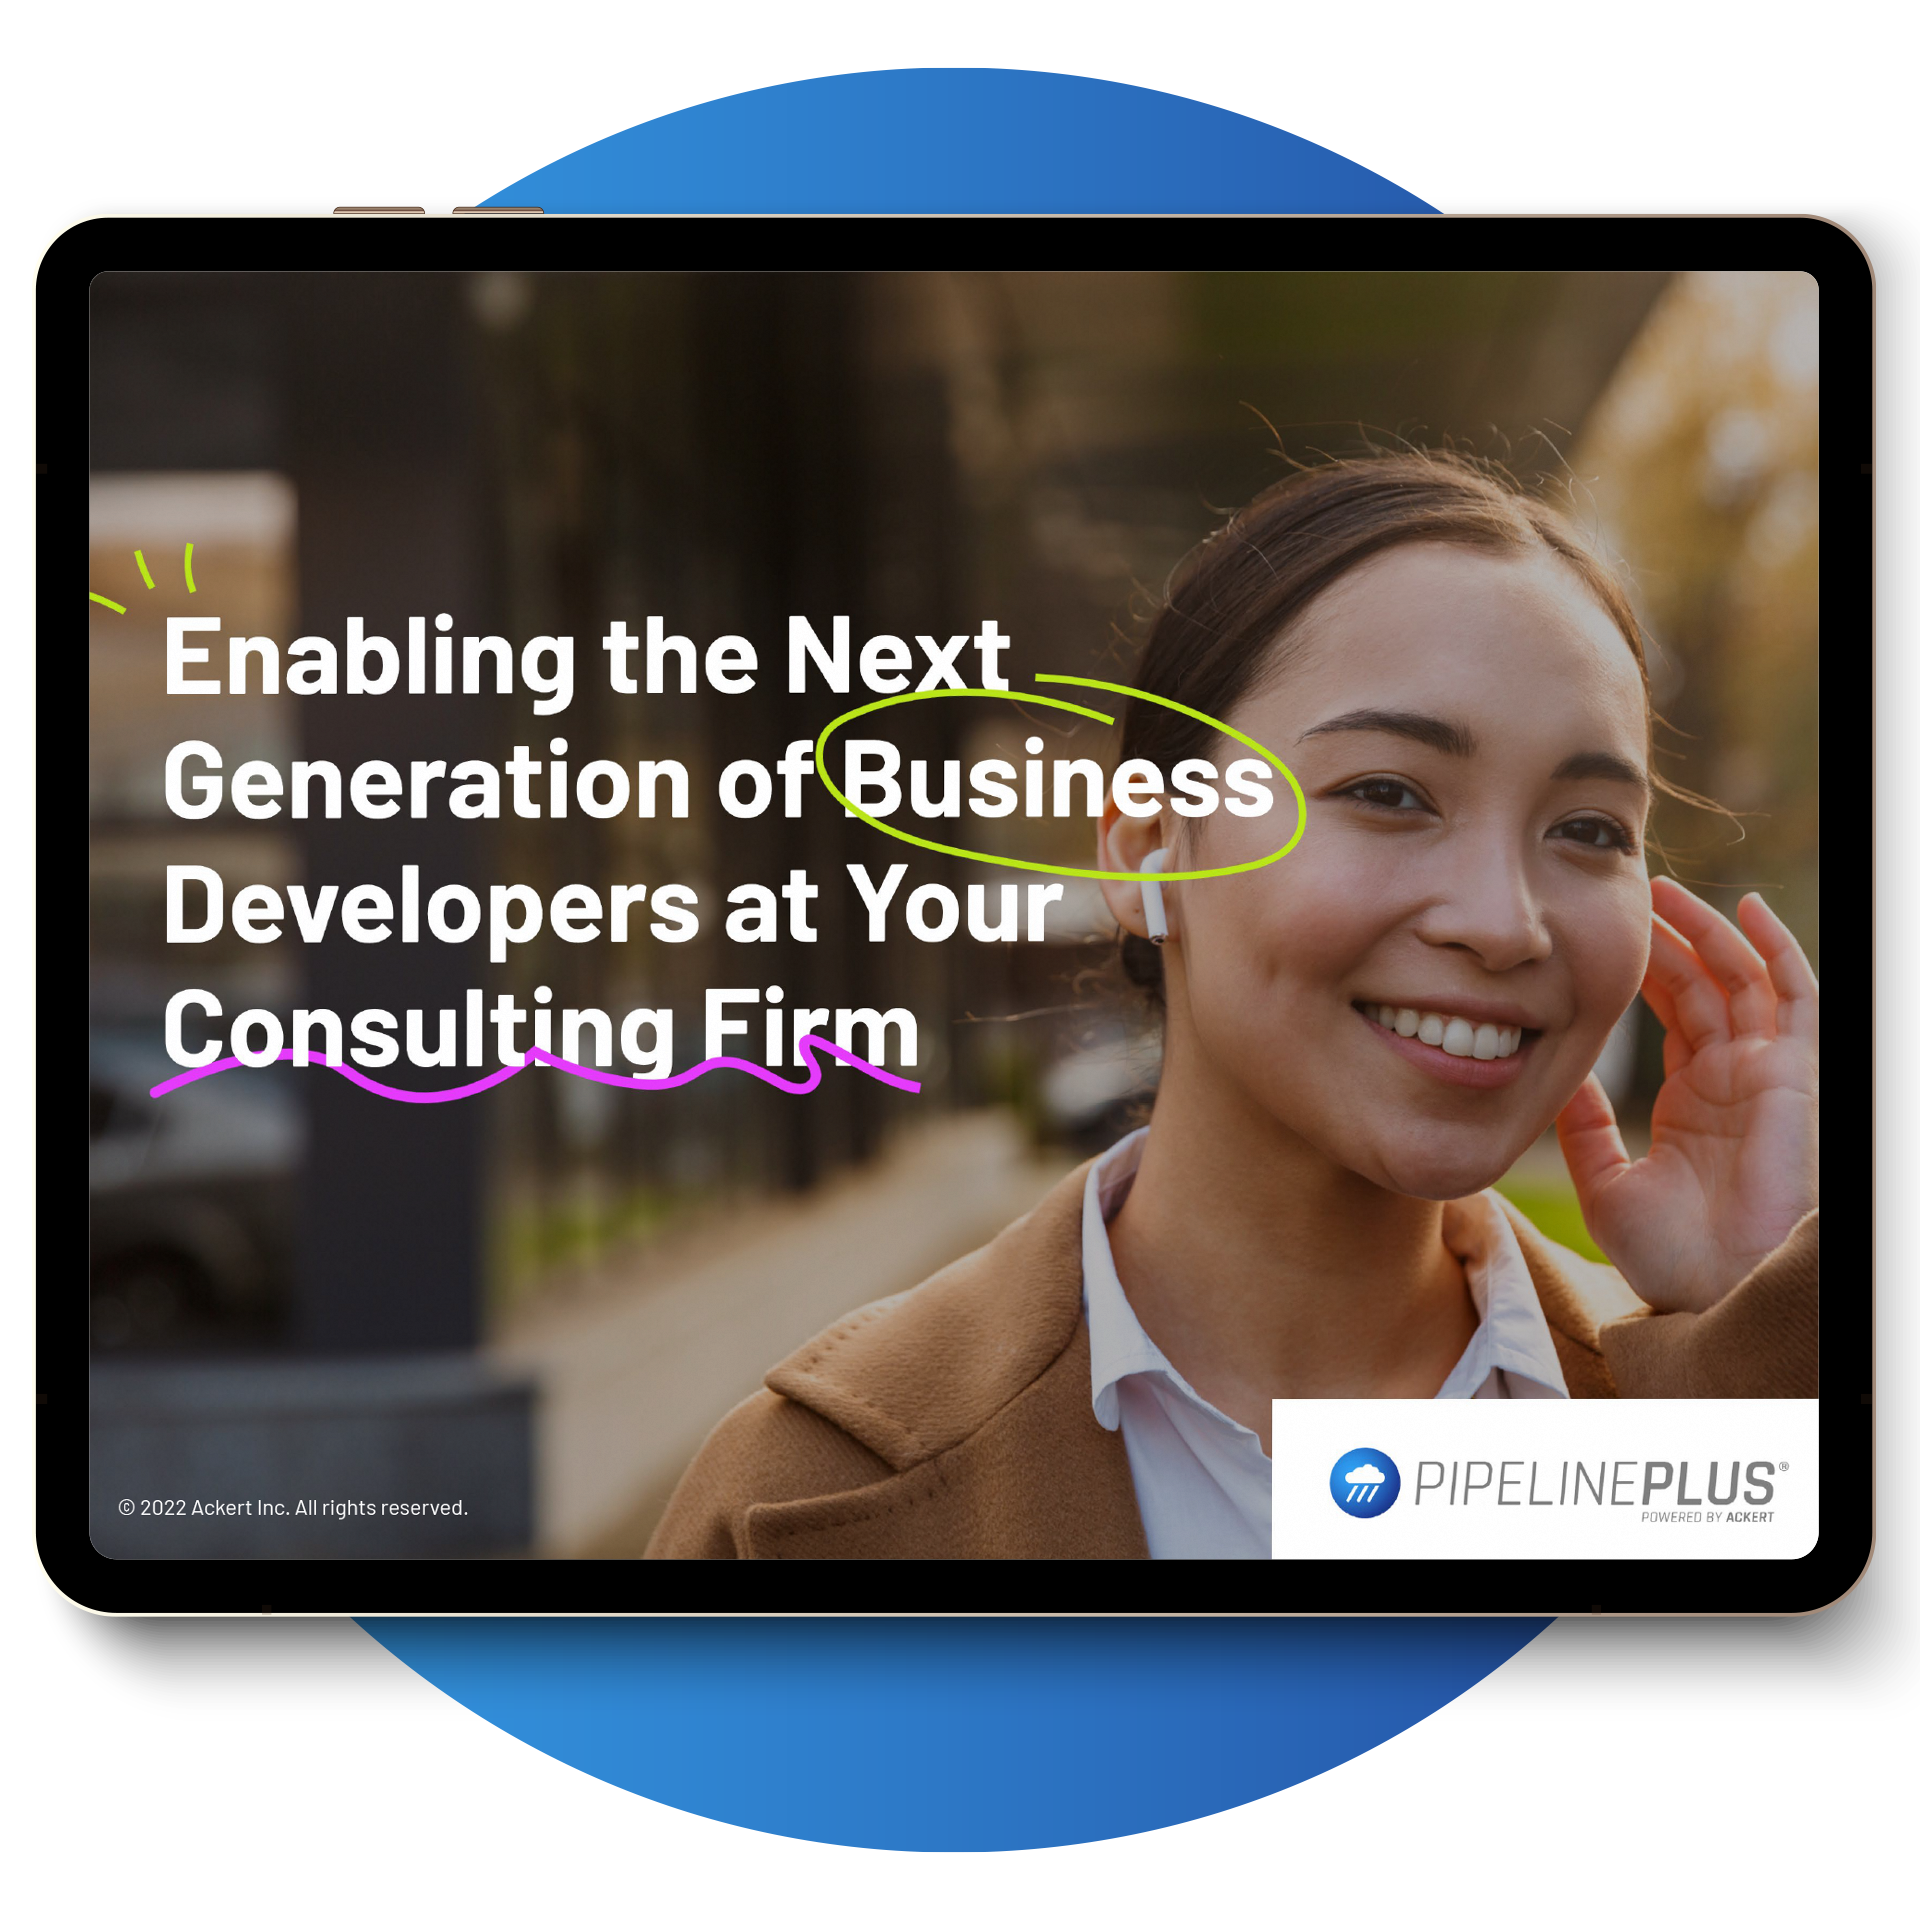 Free Guide Download | Enabling the Next Generation of Business Developers at your Consulting Firm